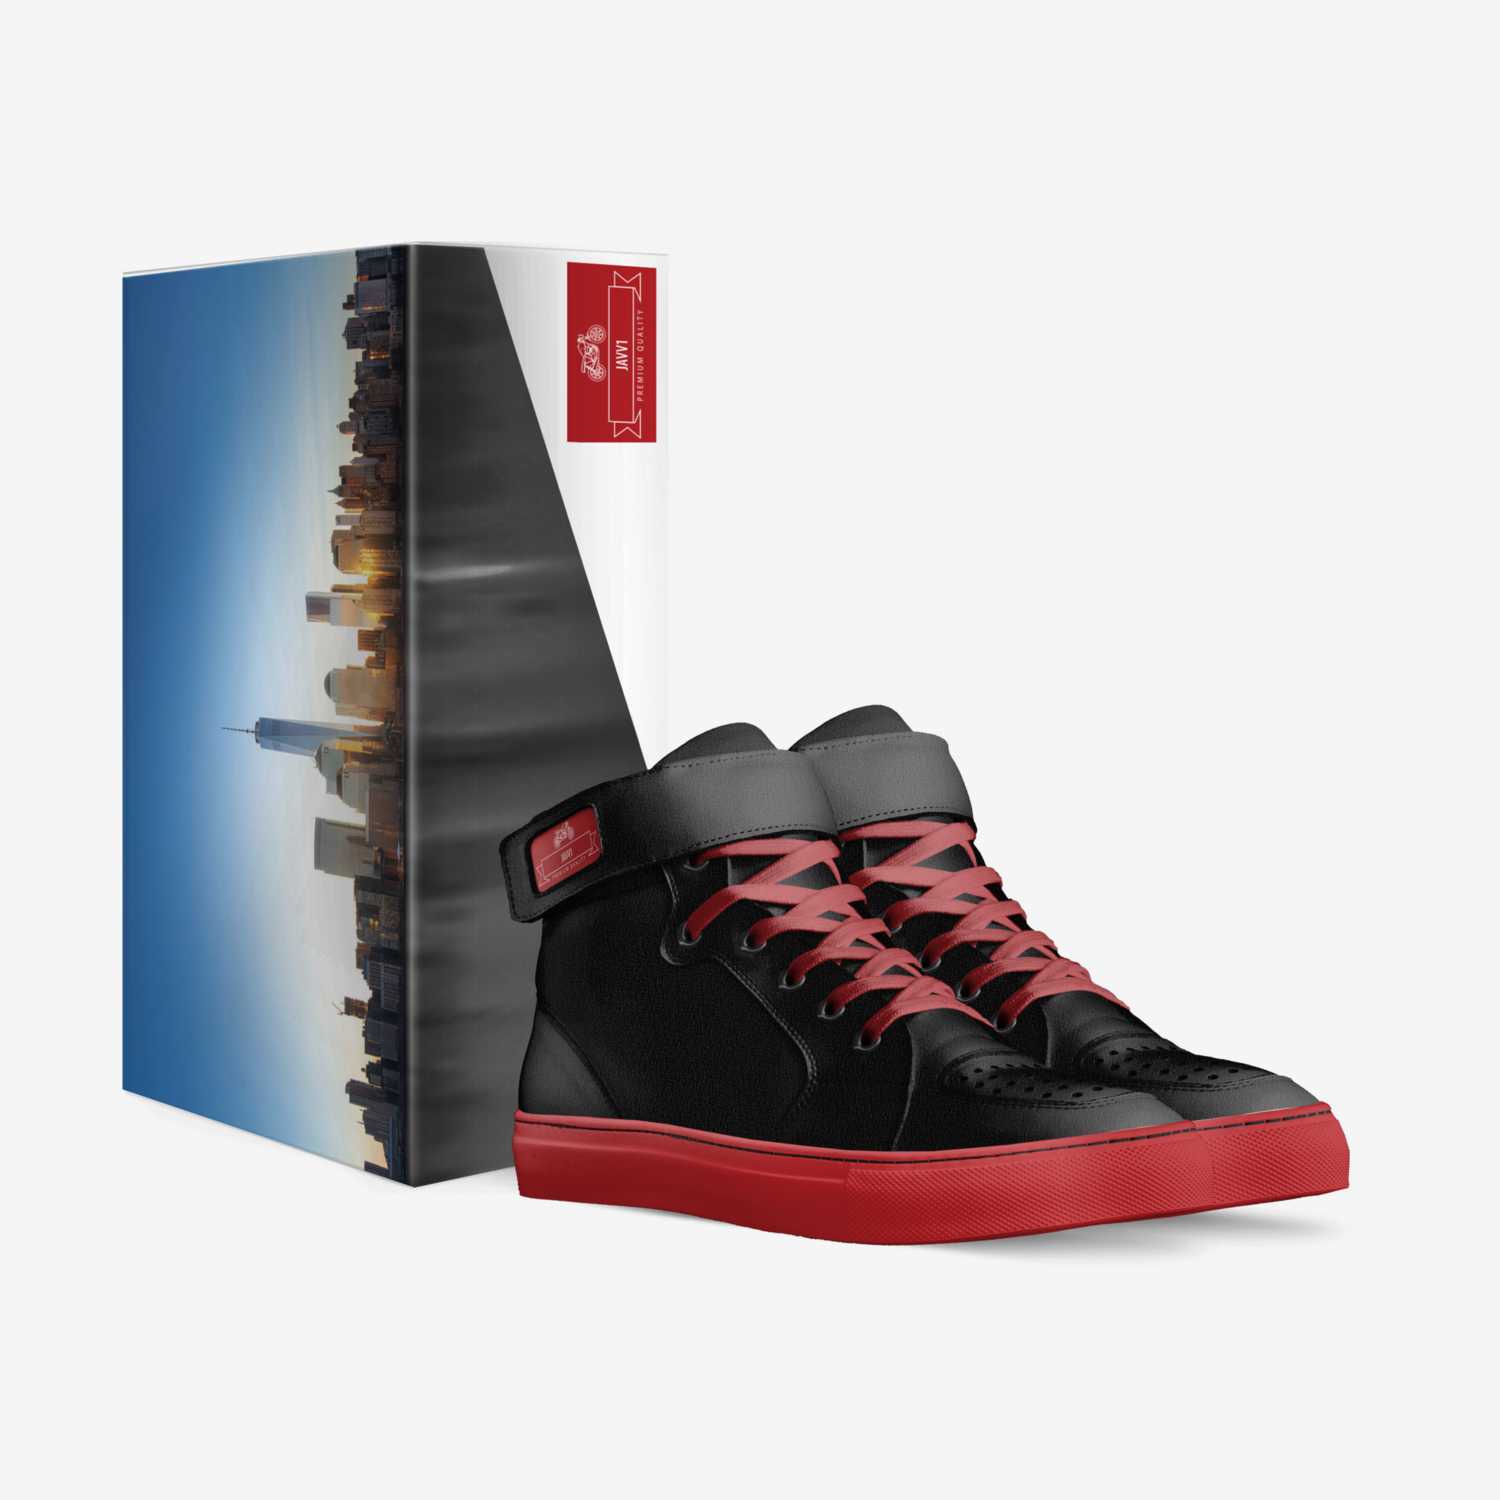 Javv1 custom made in Italy shoes by Jaheim Dean | Box view